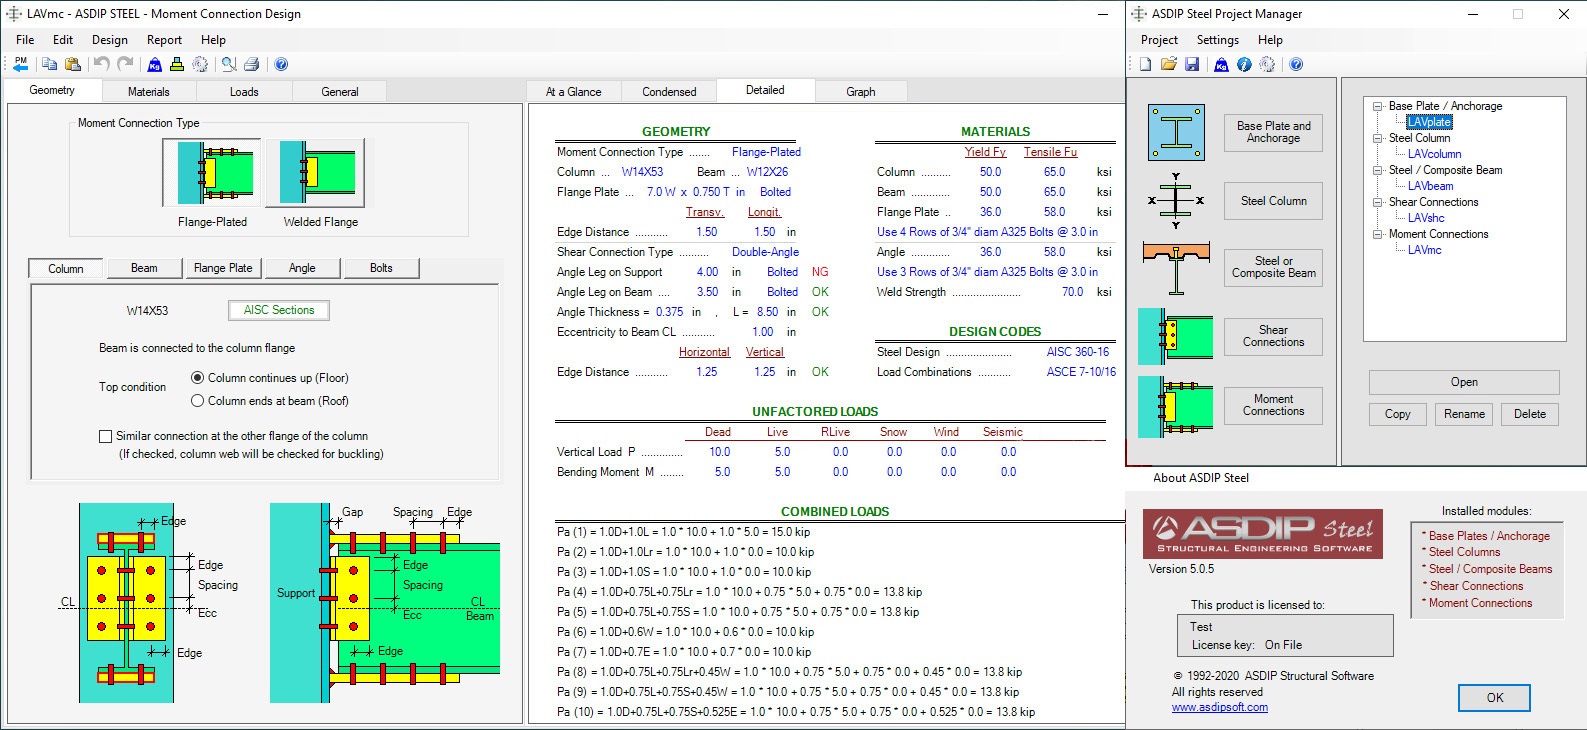 Working with ASDIP Steel 5.0.5 full license